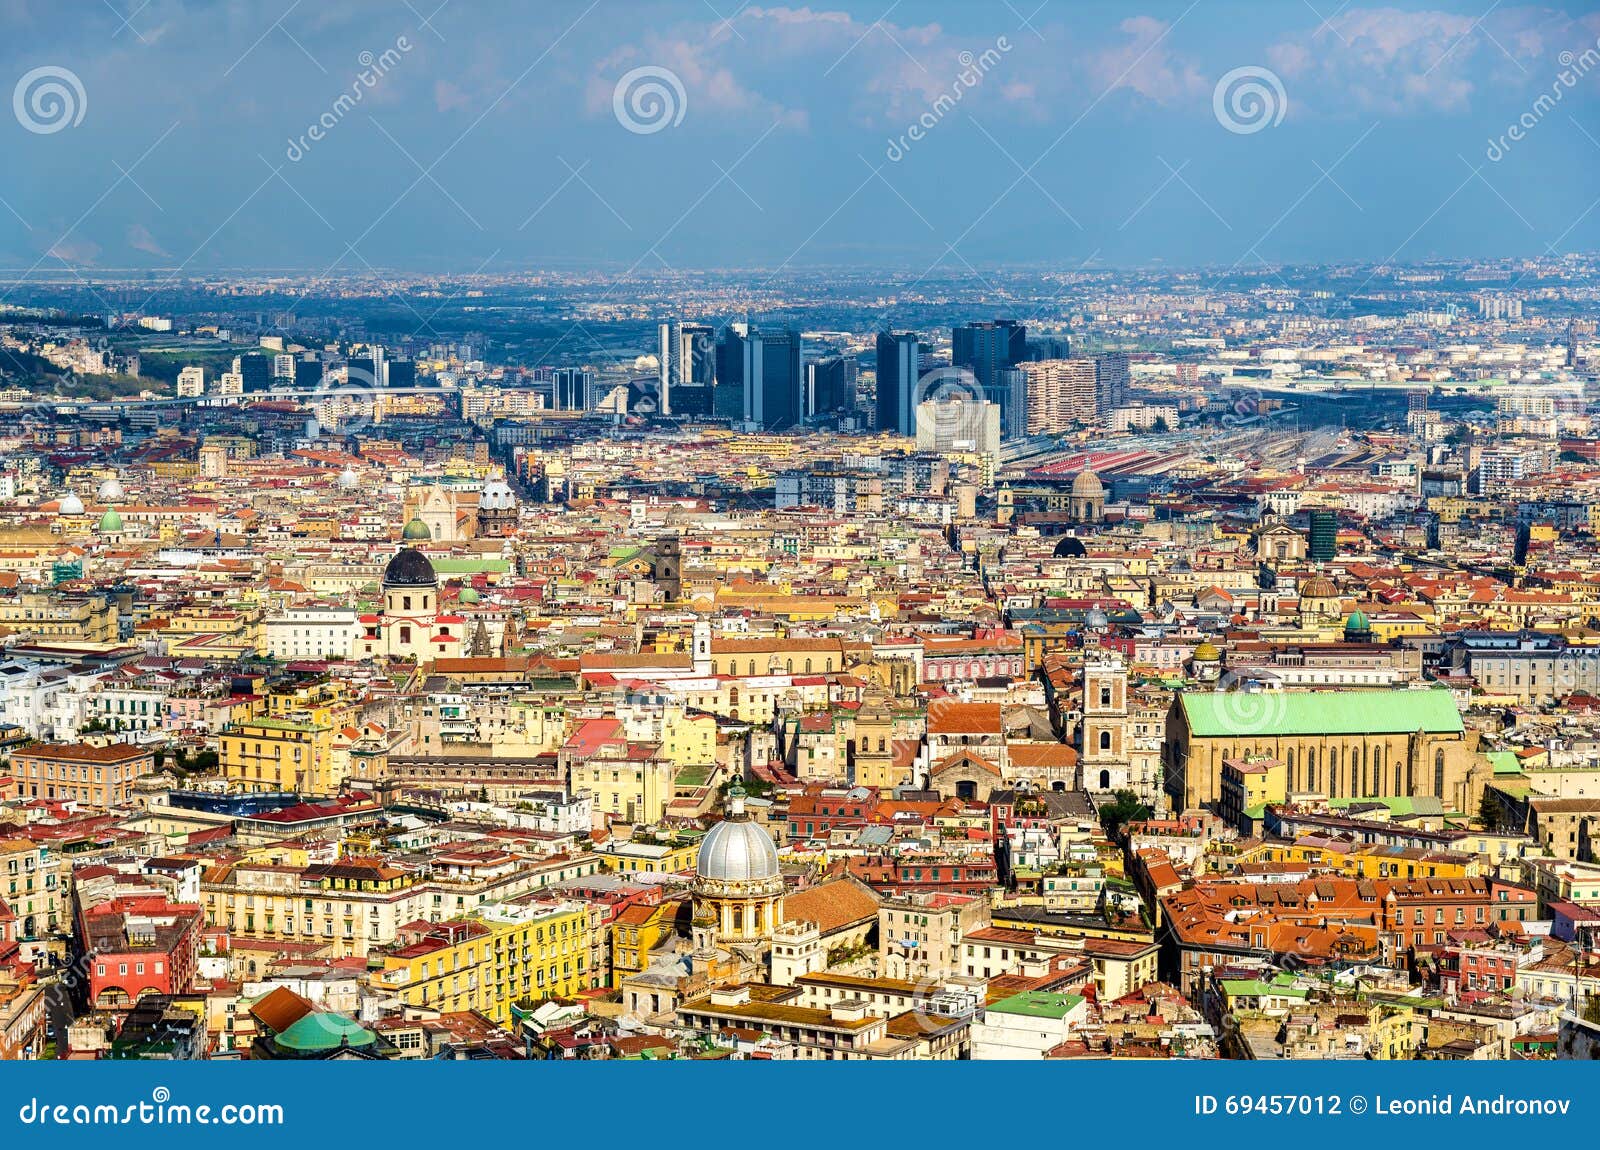 view of naples towards the centro direzionale and napoli centrale